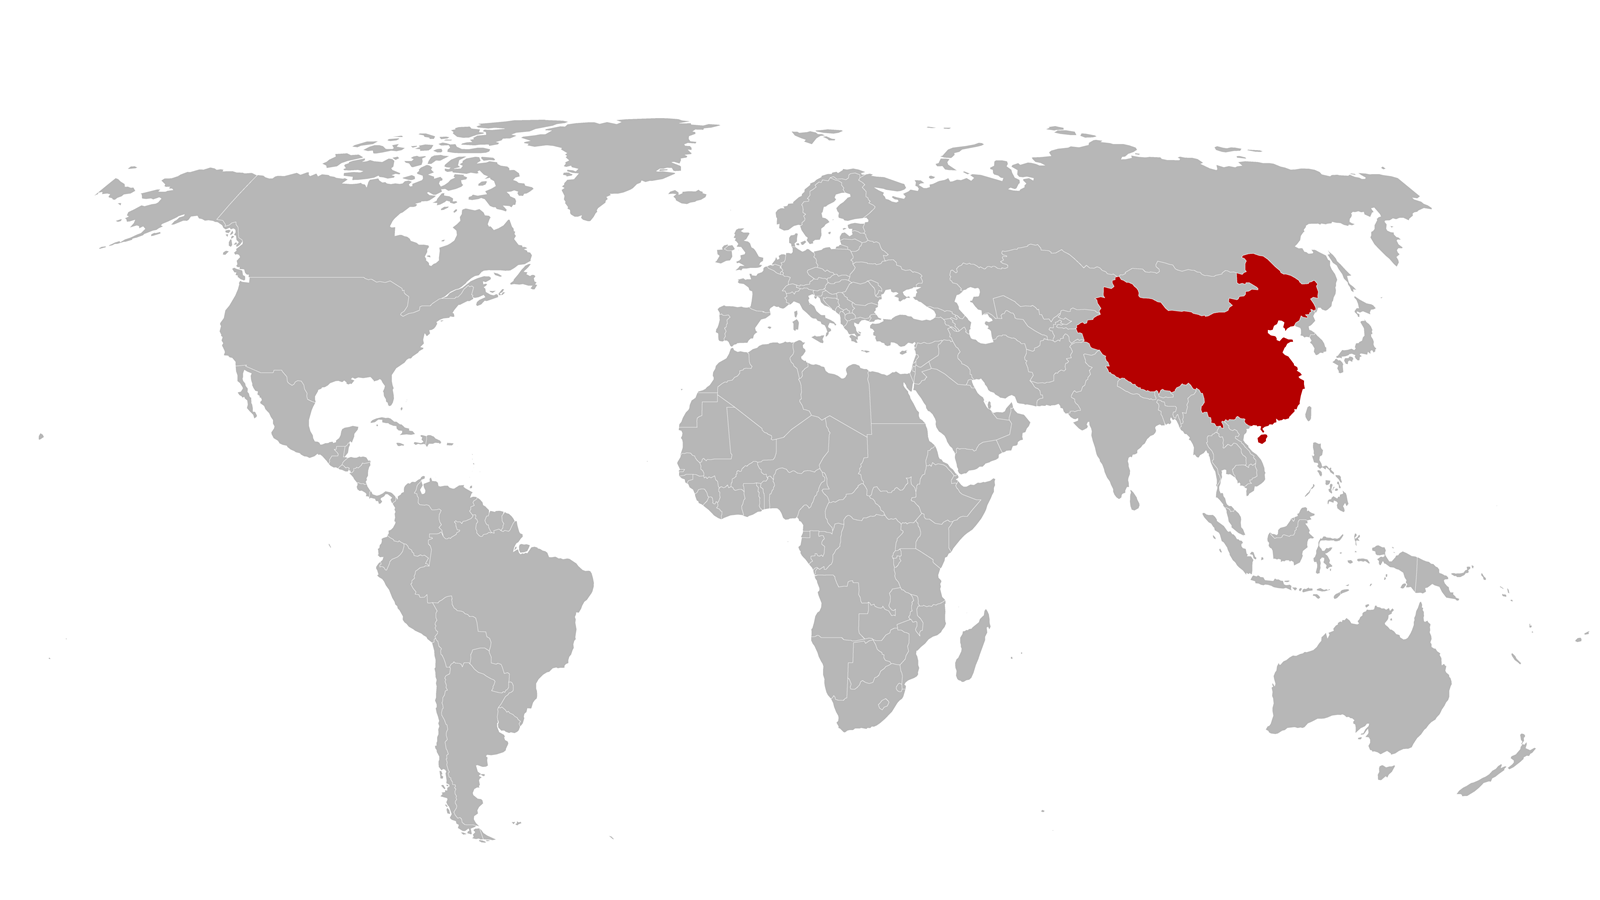 World map with China hightlighted